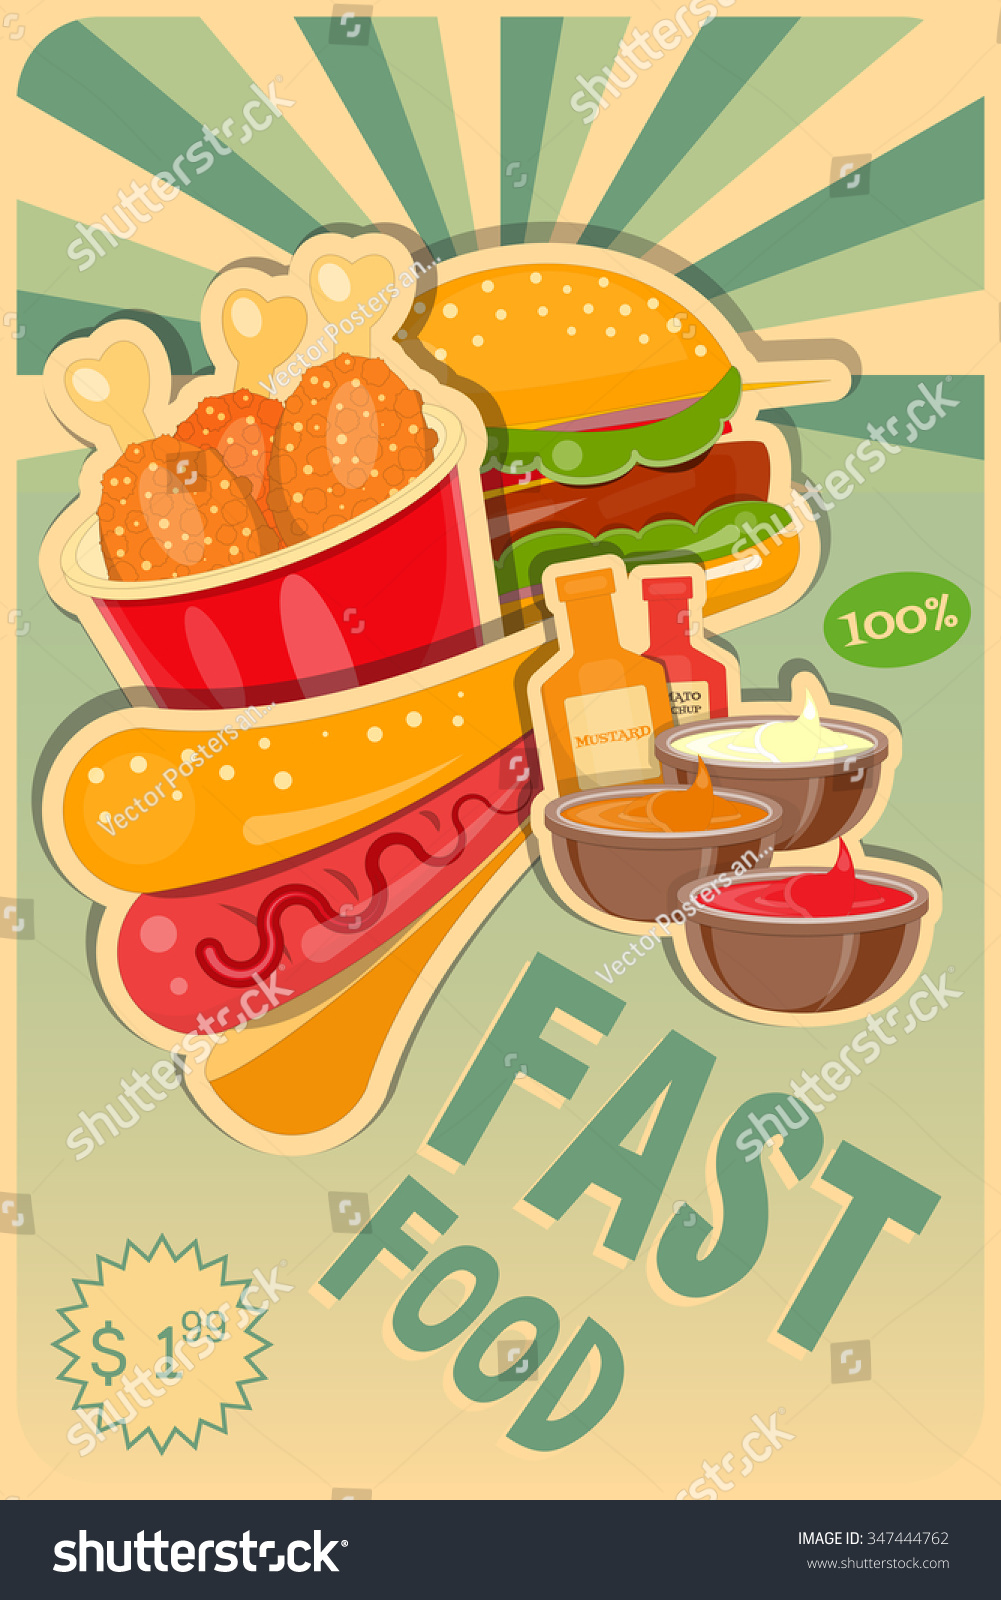 Fast Food Poster - Burgers, Hot Dog And Chicken ...